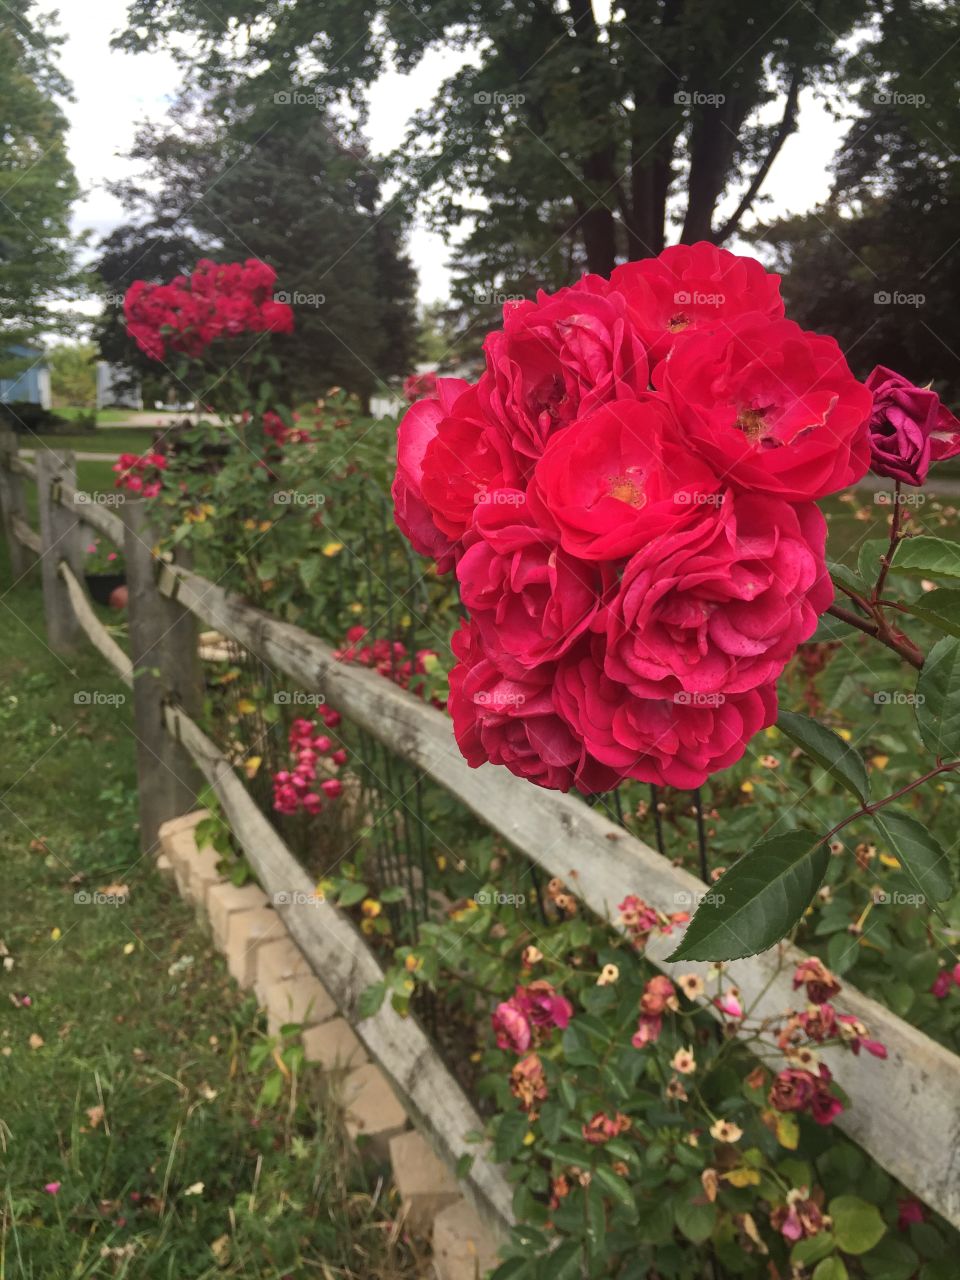 Roses blooming along a fence line.